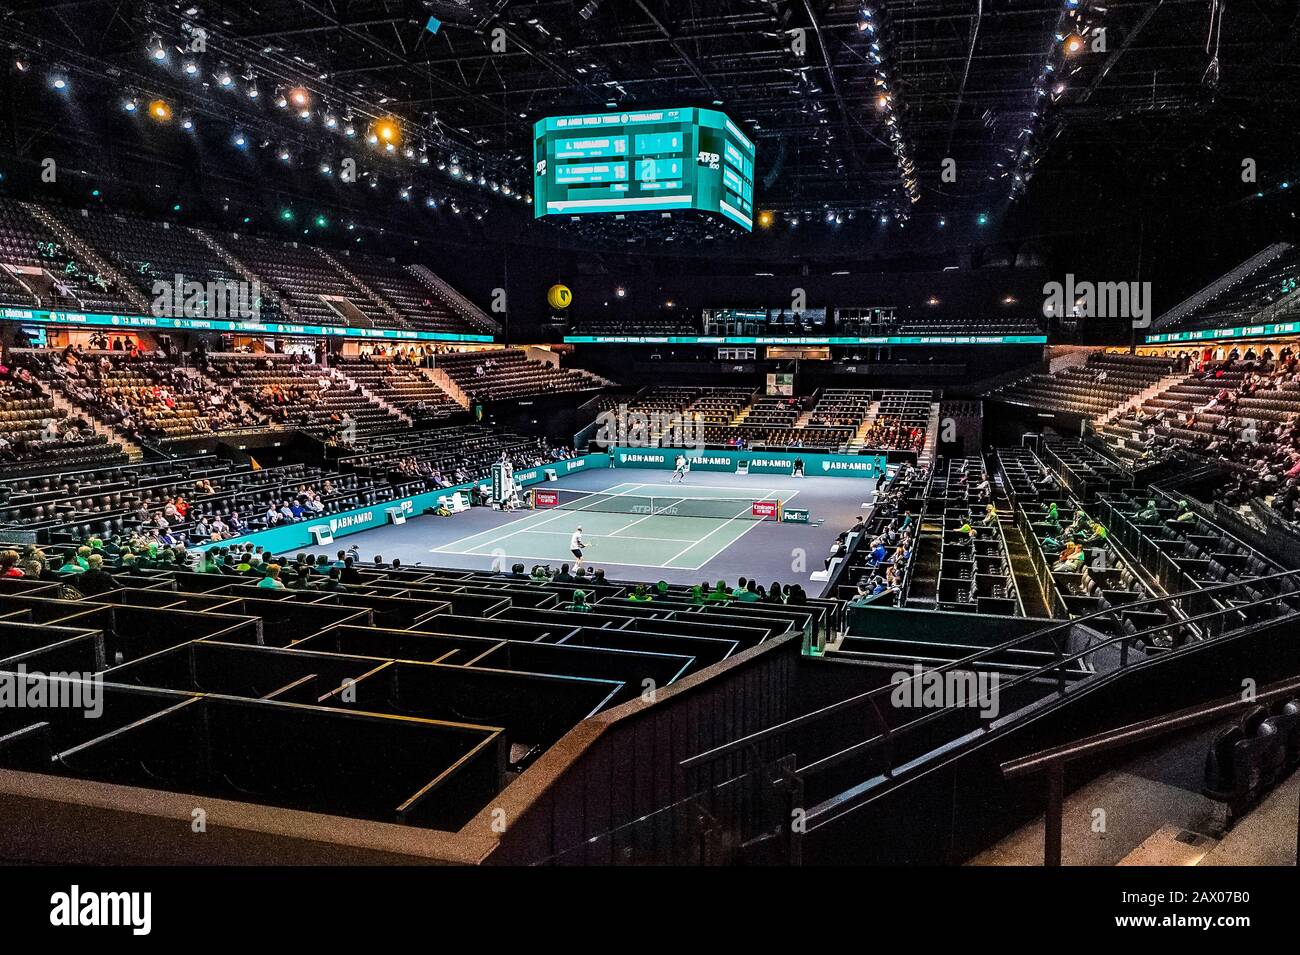 Rotterdam, Netherlands. 10th Feb, 2020. ABN AMRO World Tennis Tournament,  10-02-2020, Ahoy overview of Court 1 Credit: Pro Shots/Alamy Live News  Stock Photo - Alamy